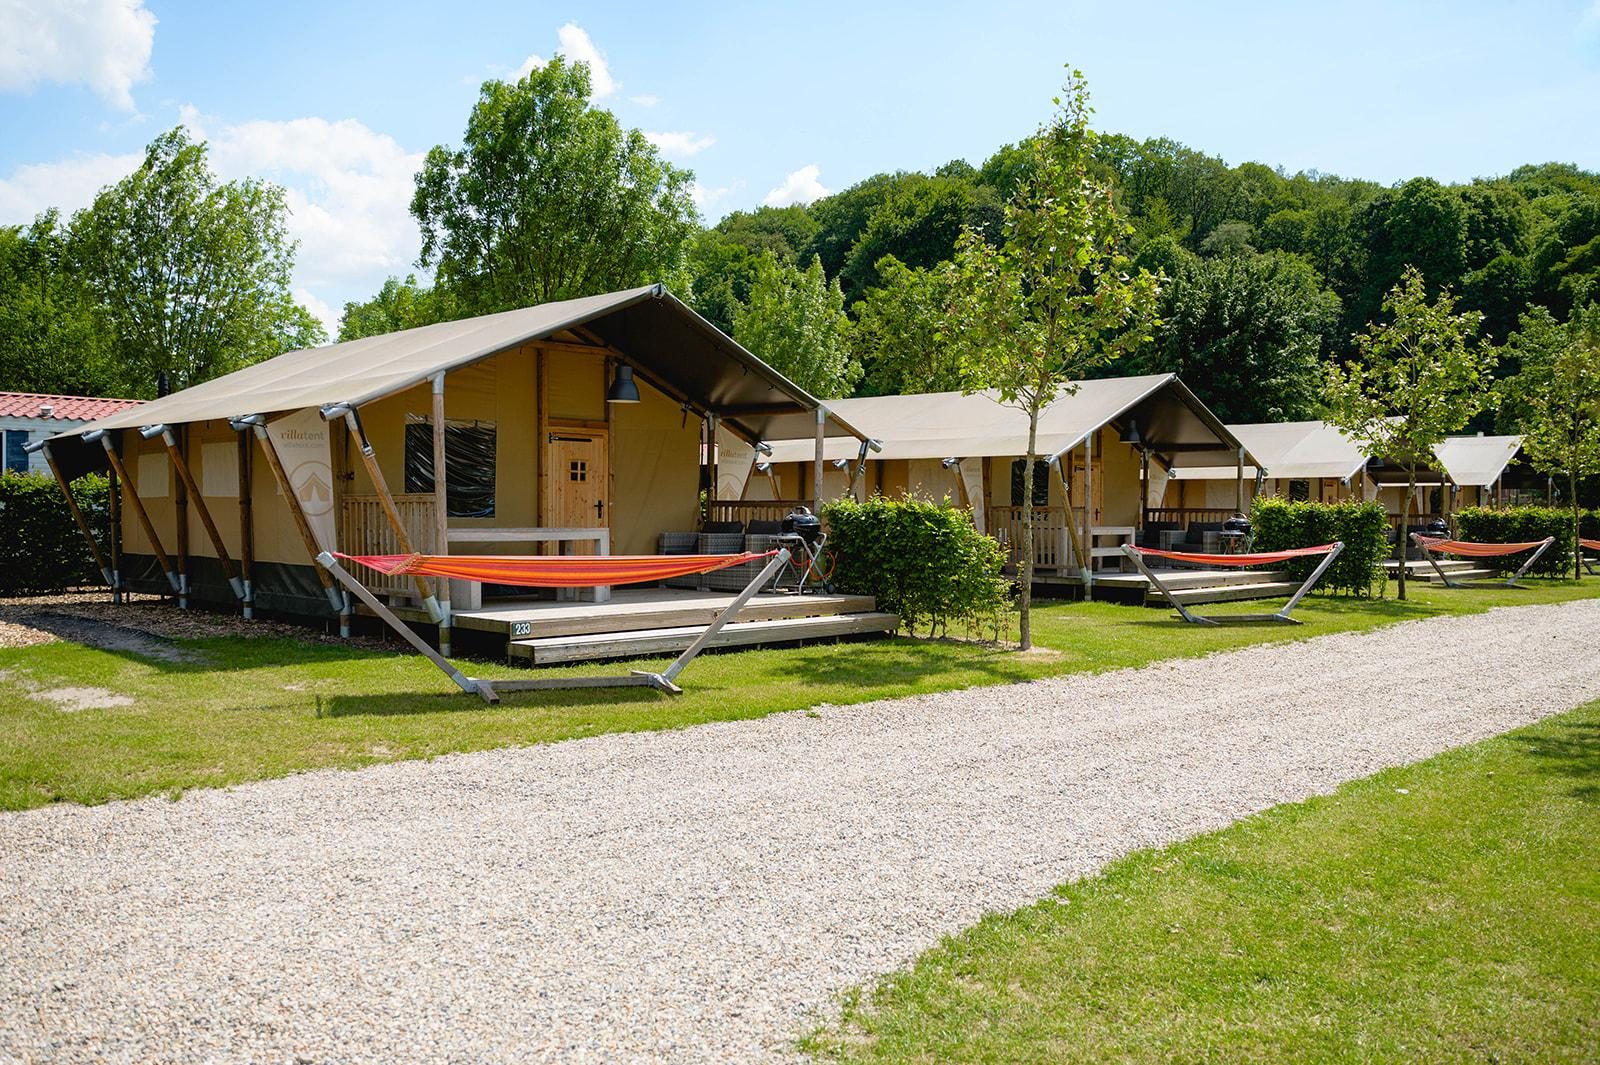 Camping 't Geuldal